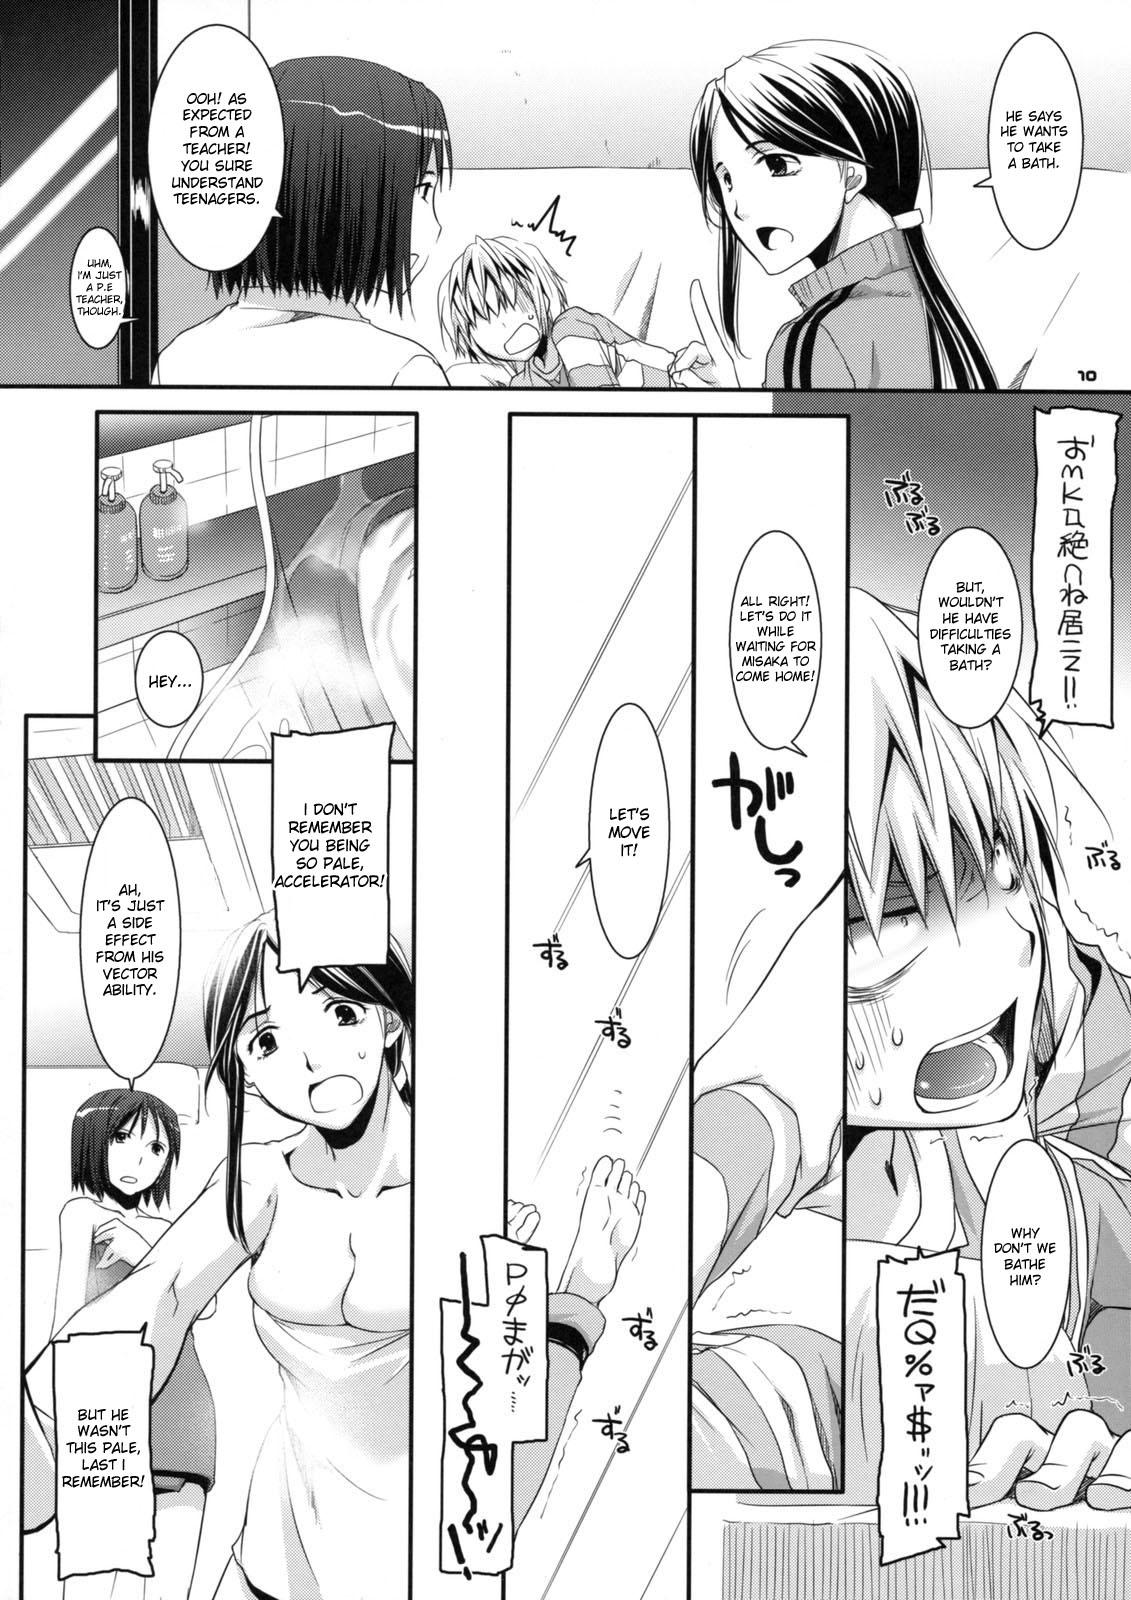 Awesome D.L. action 46 - Toaru majutsu no index Large - Page 9